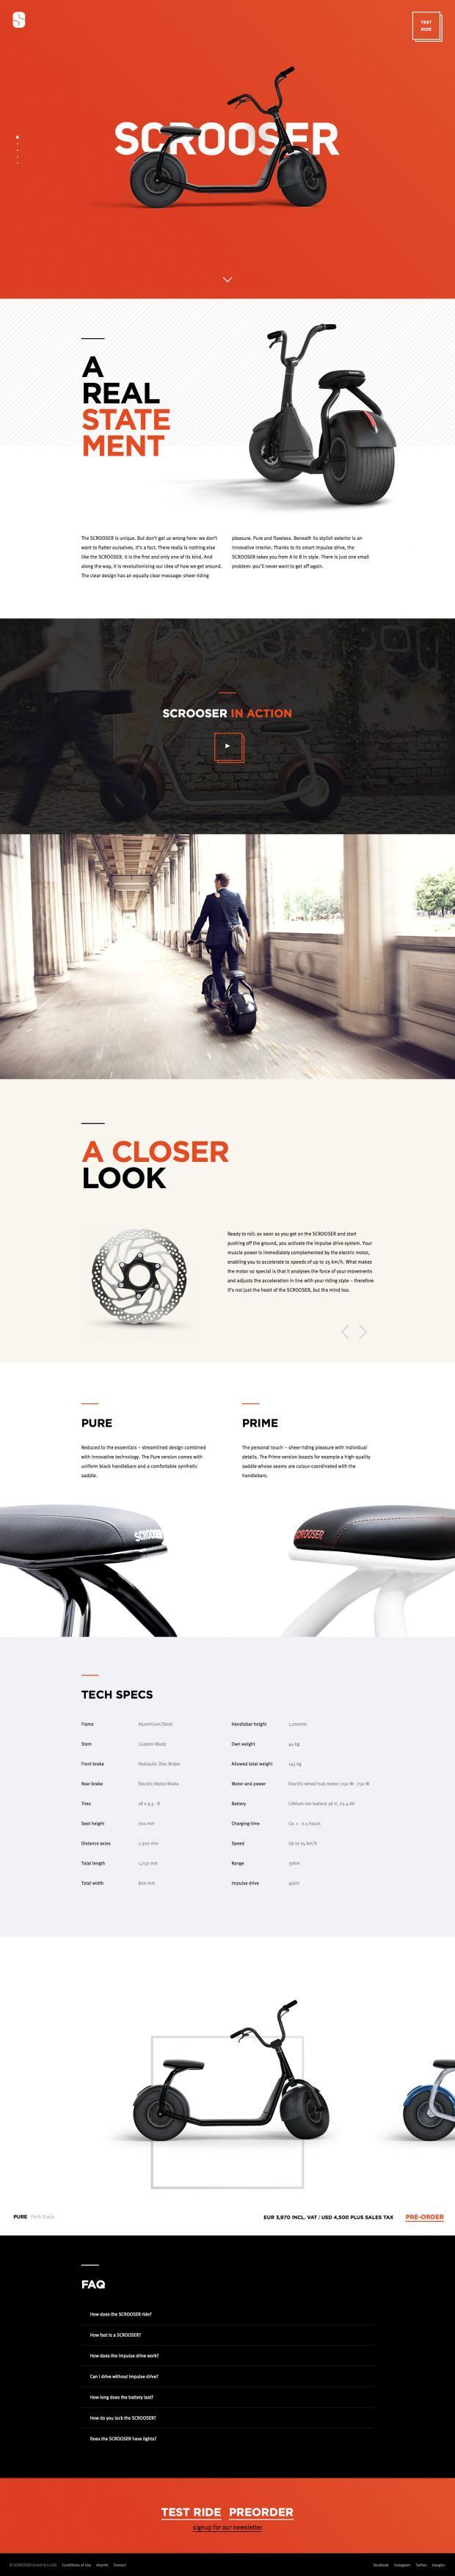 SCROOSER is real lifestyle. The SCROOSER is unique - Best Webdesign inspiration ...